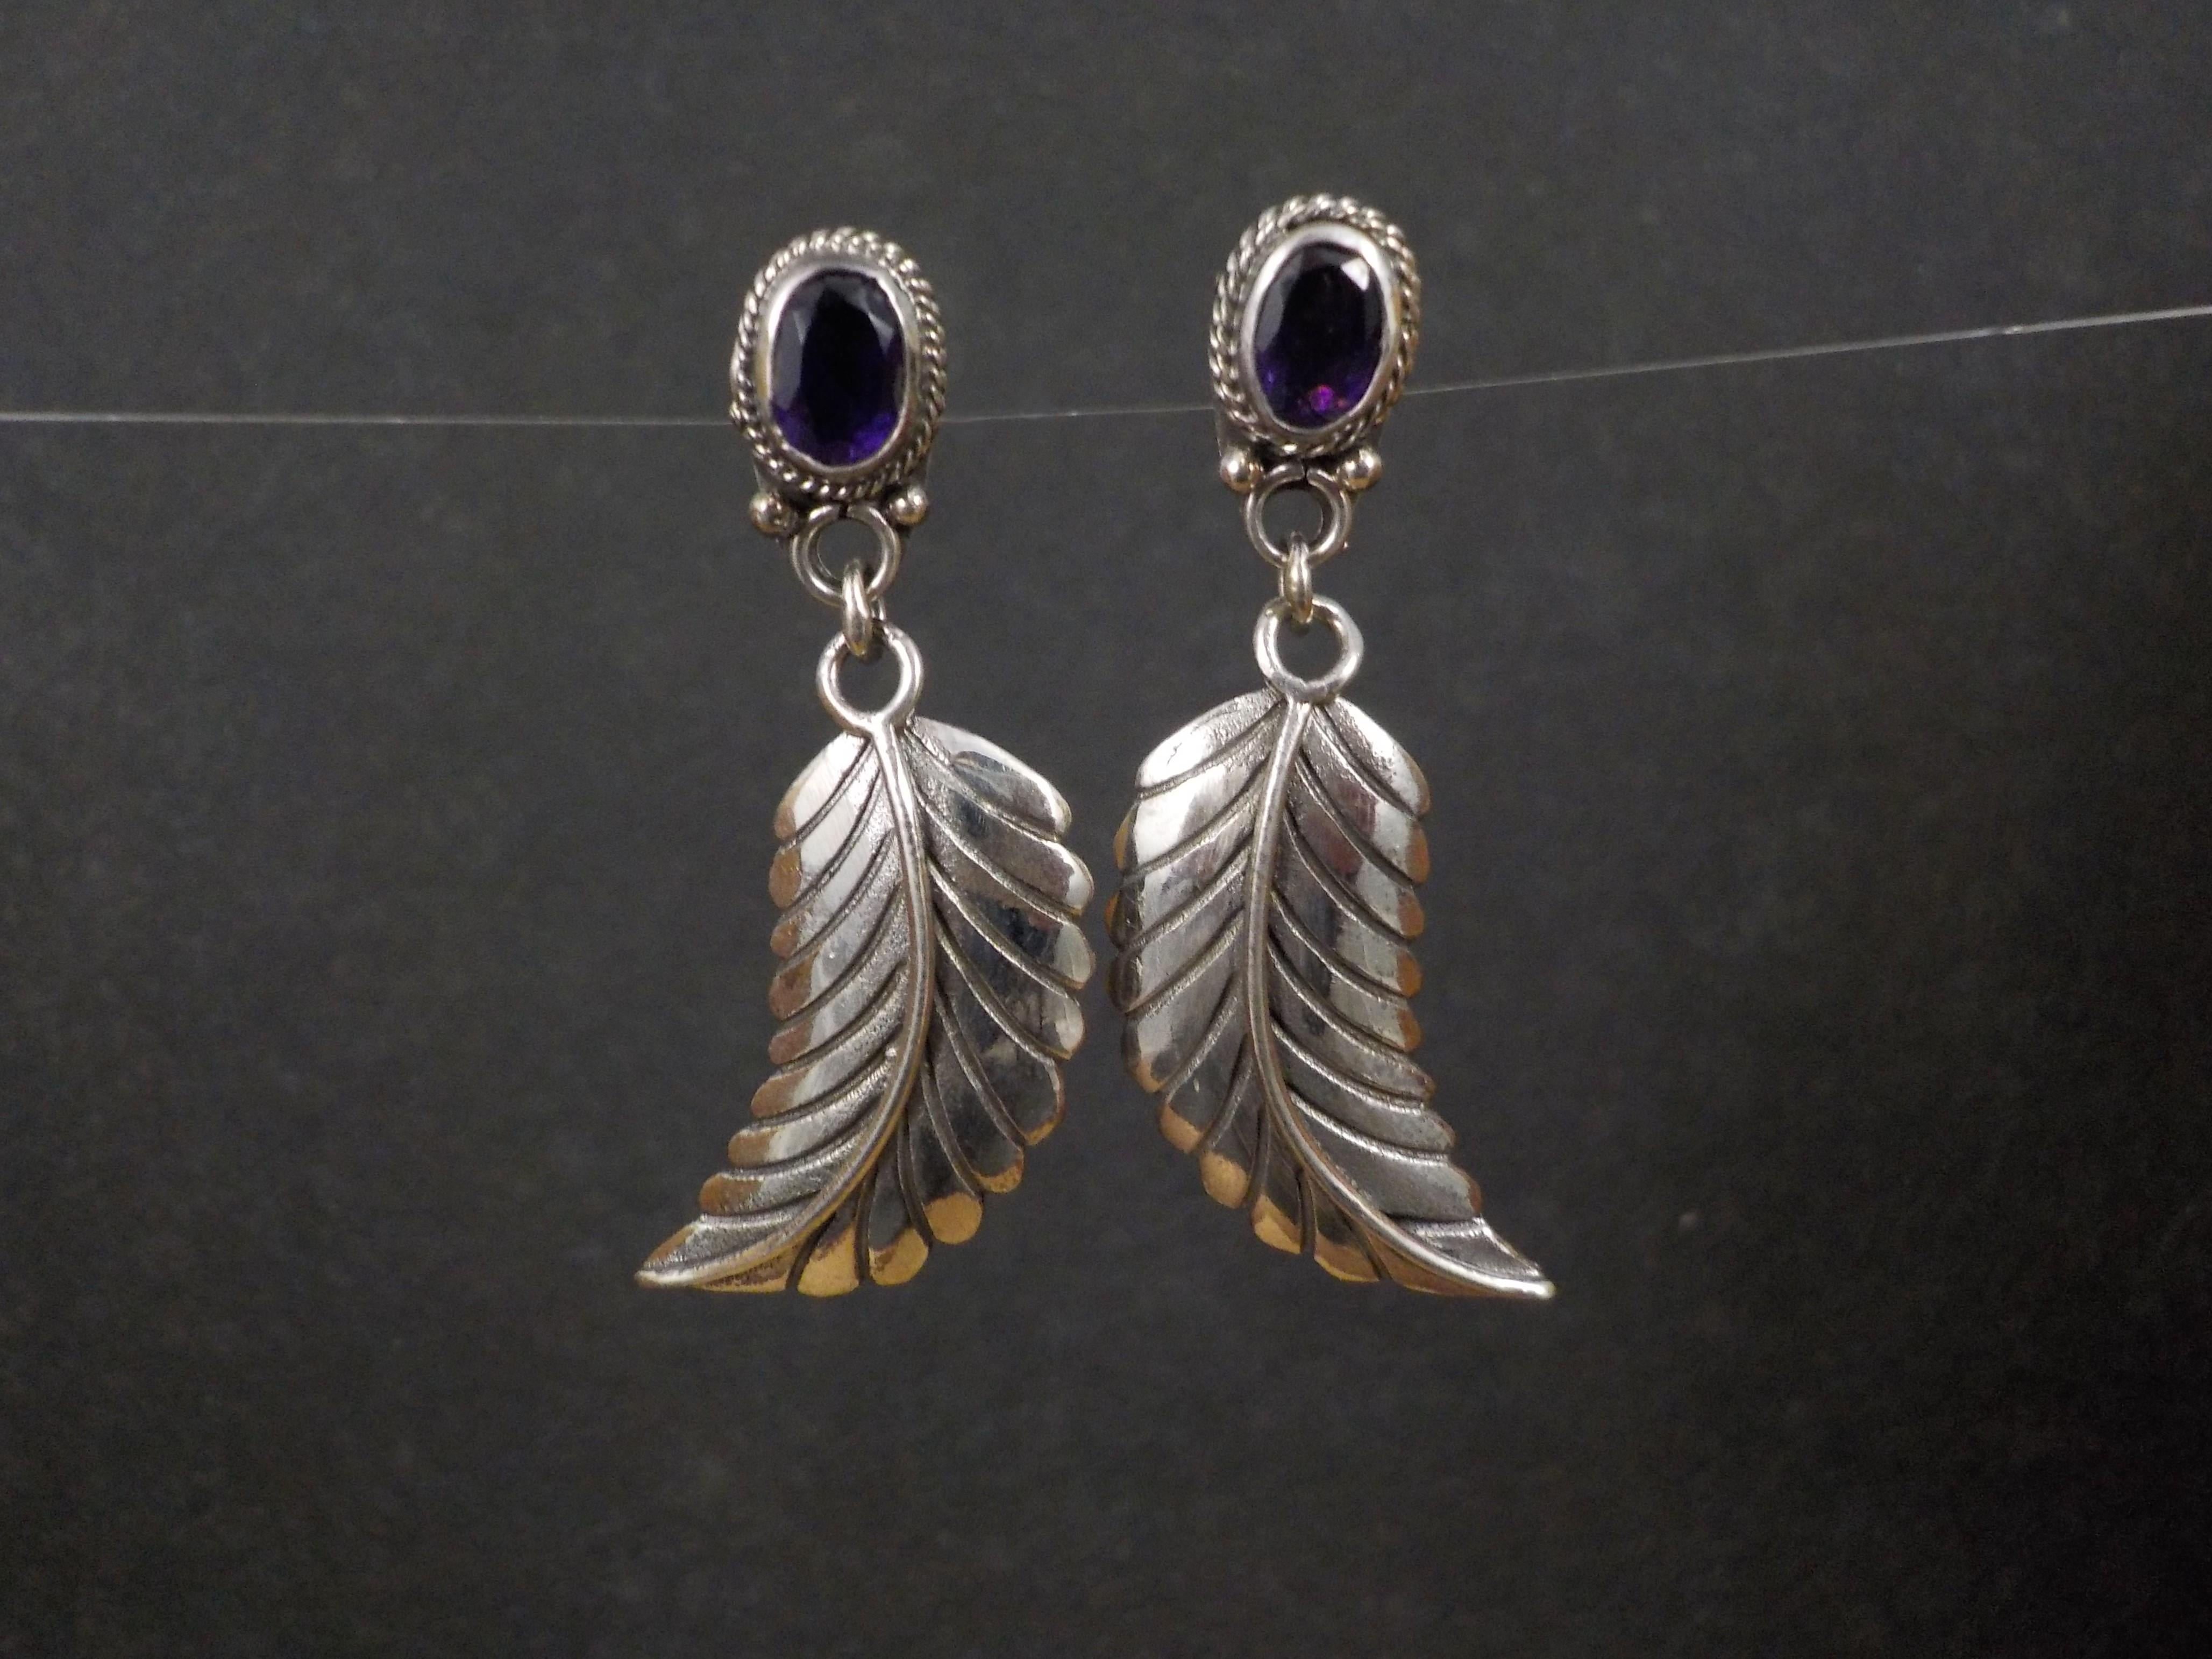 These beautiful Southwestern style feather earrings are sterling silver with 5x7mm oval cut amethyst gemstones.
Measurements: 1/2 by 1 5/8 inches
Weight: 5.8 grams
Marks: 925
Condition: New